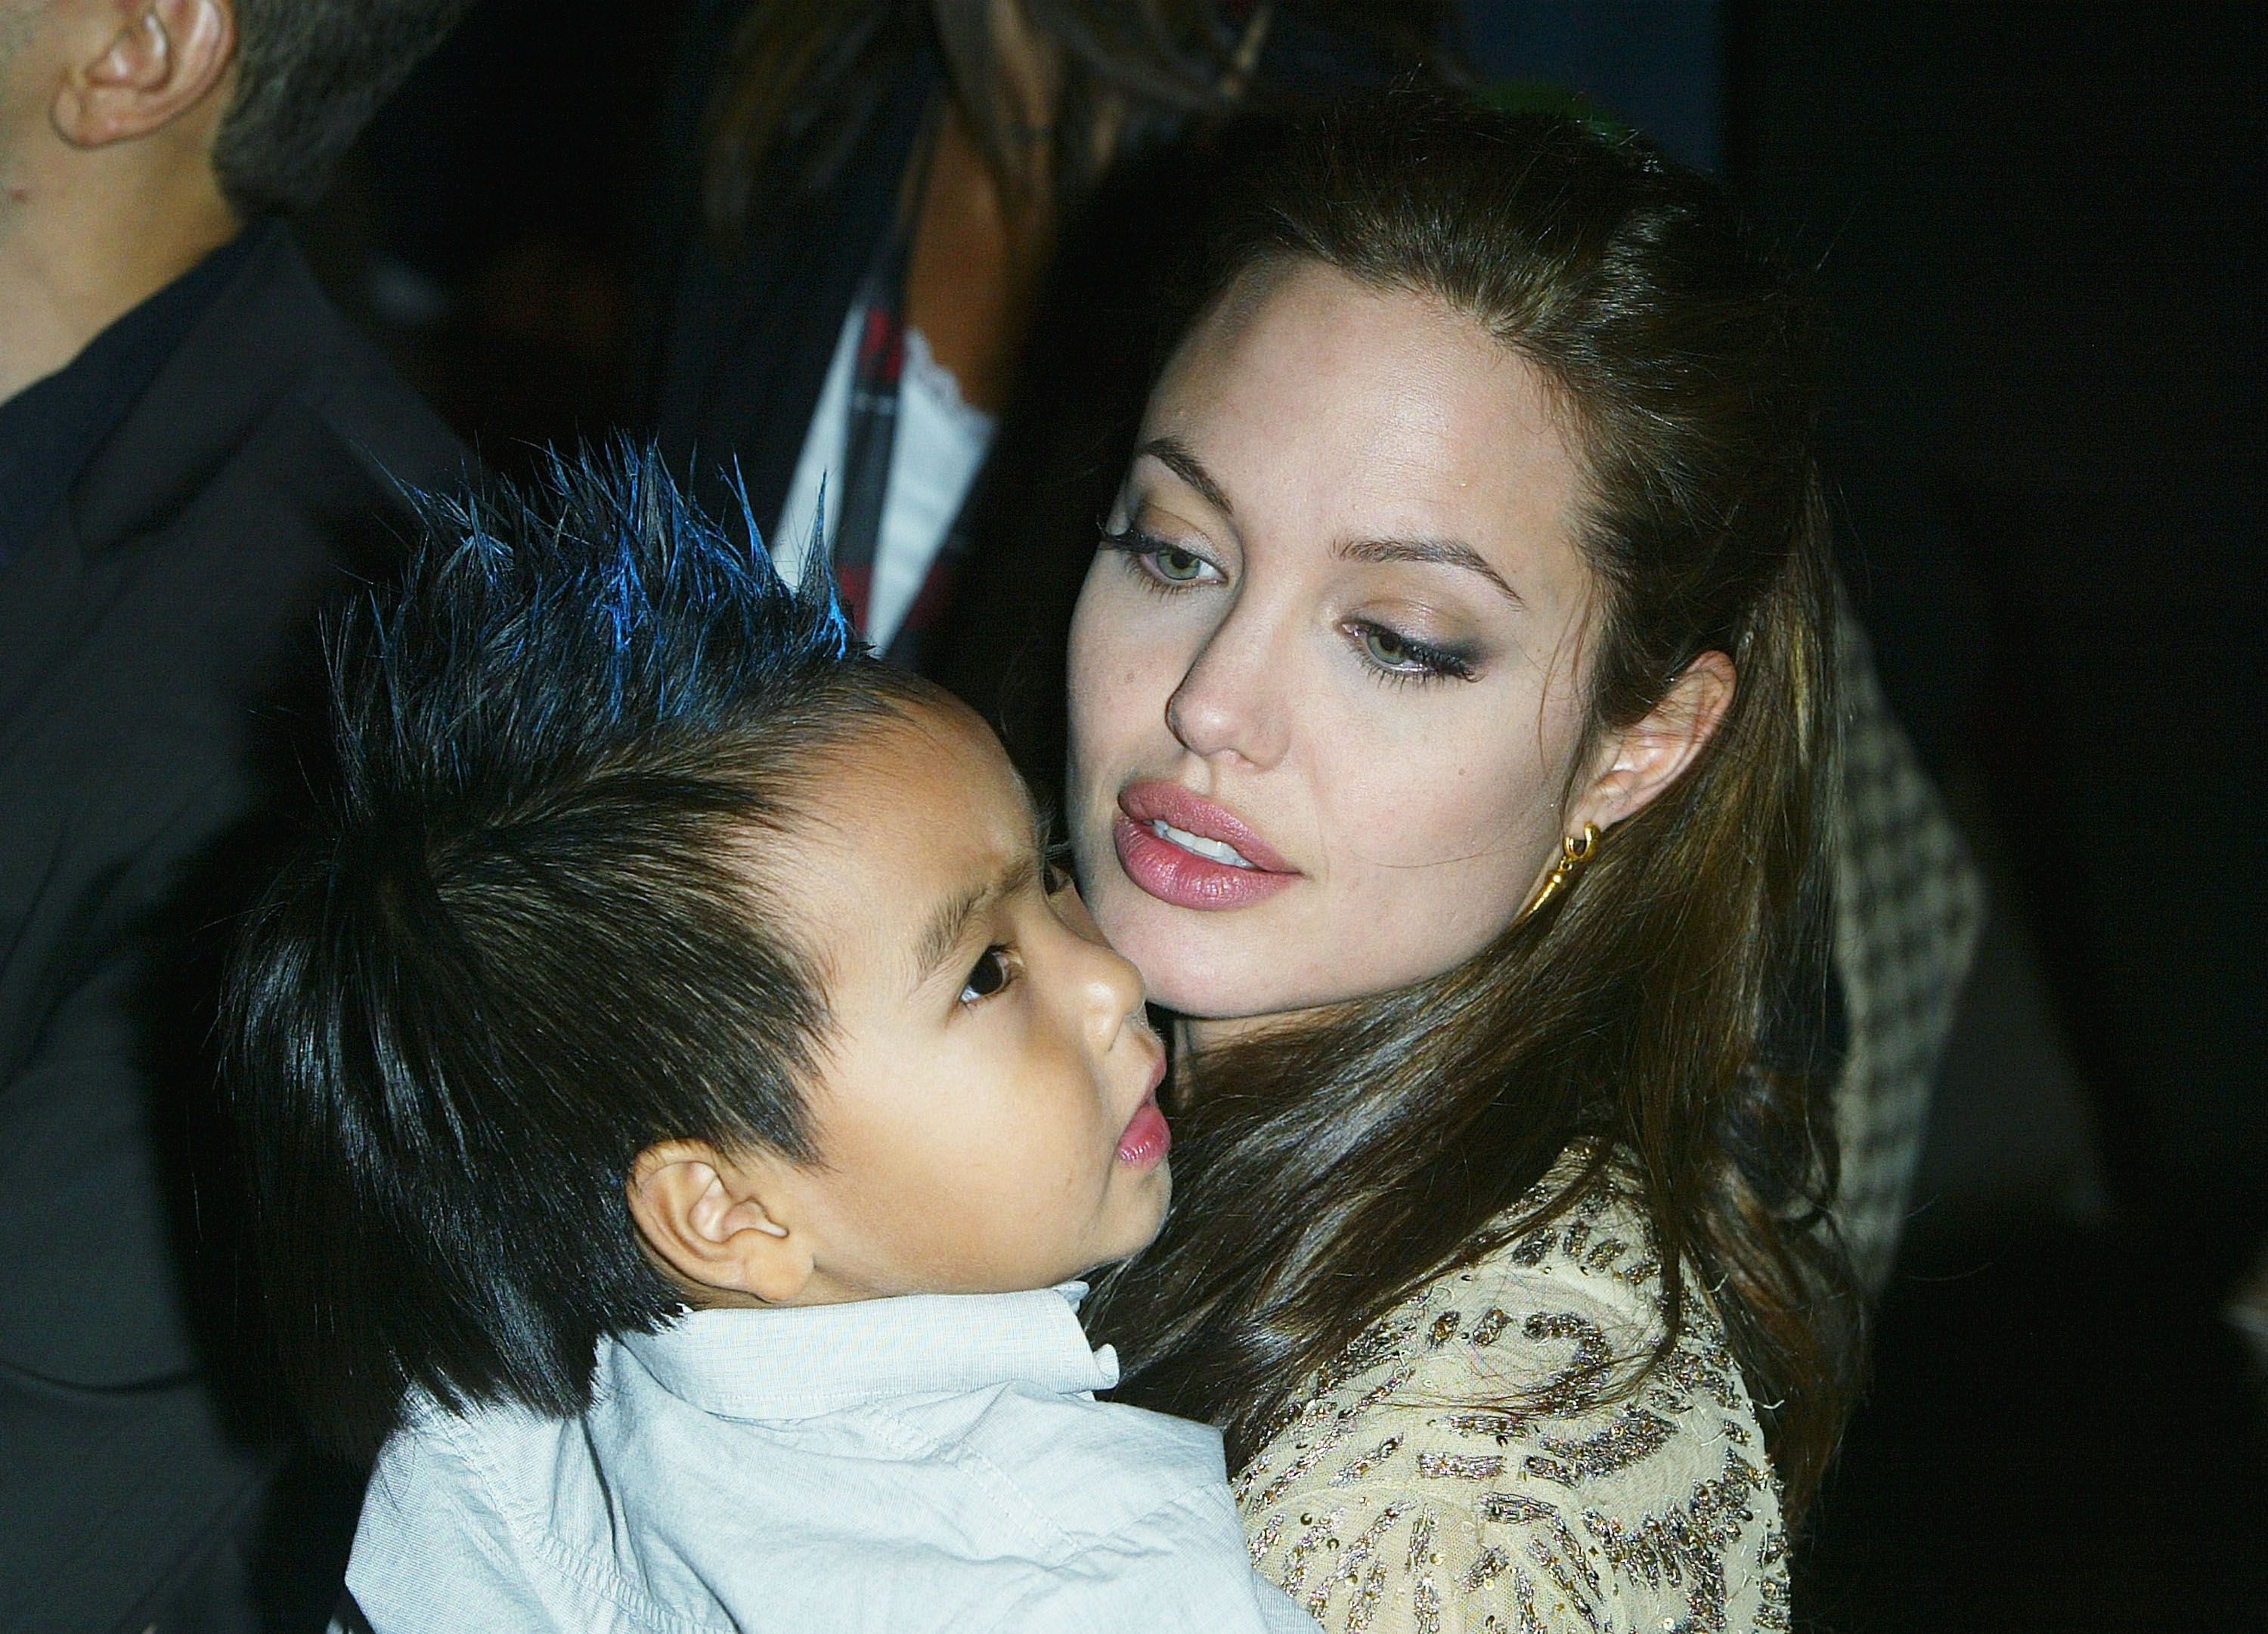 Angelina Jolie and her son Maddox at the World Premiere of "Shark Tale" in Venice in 2004 | Source: Getty Images